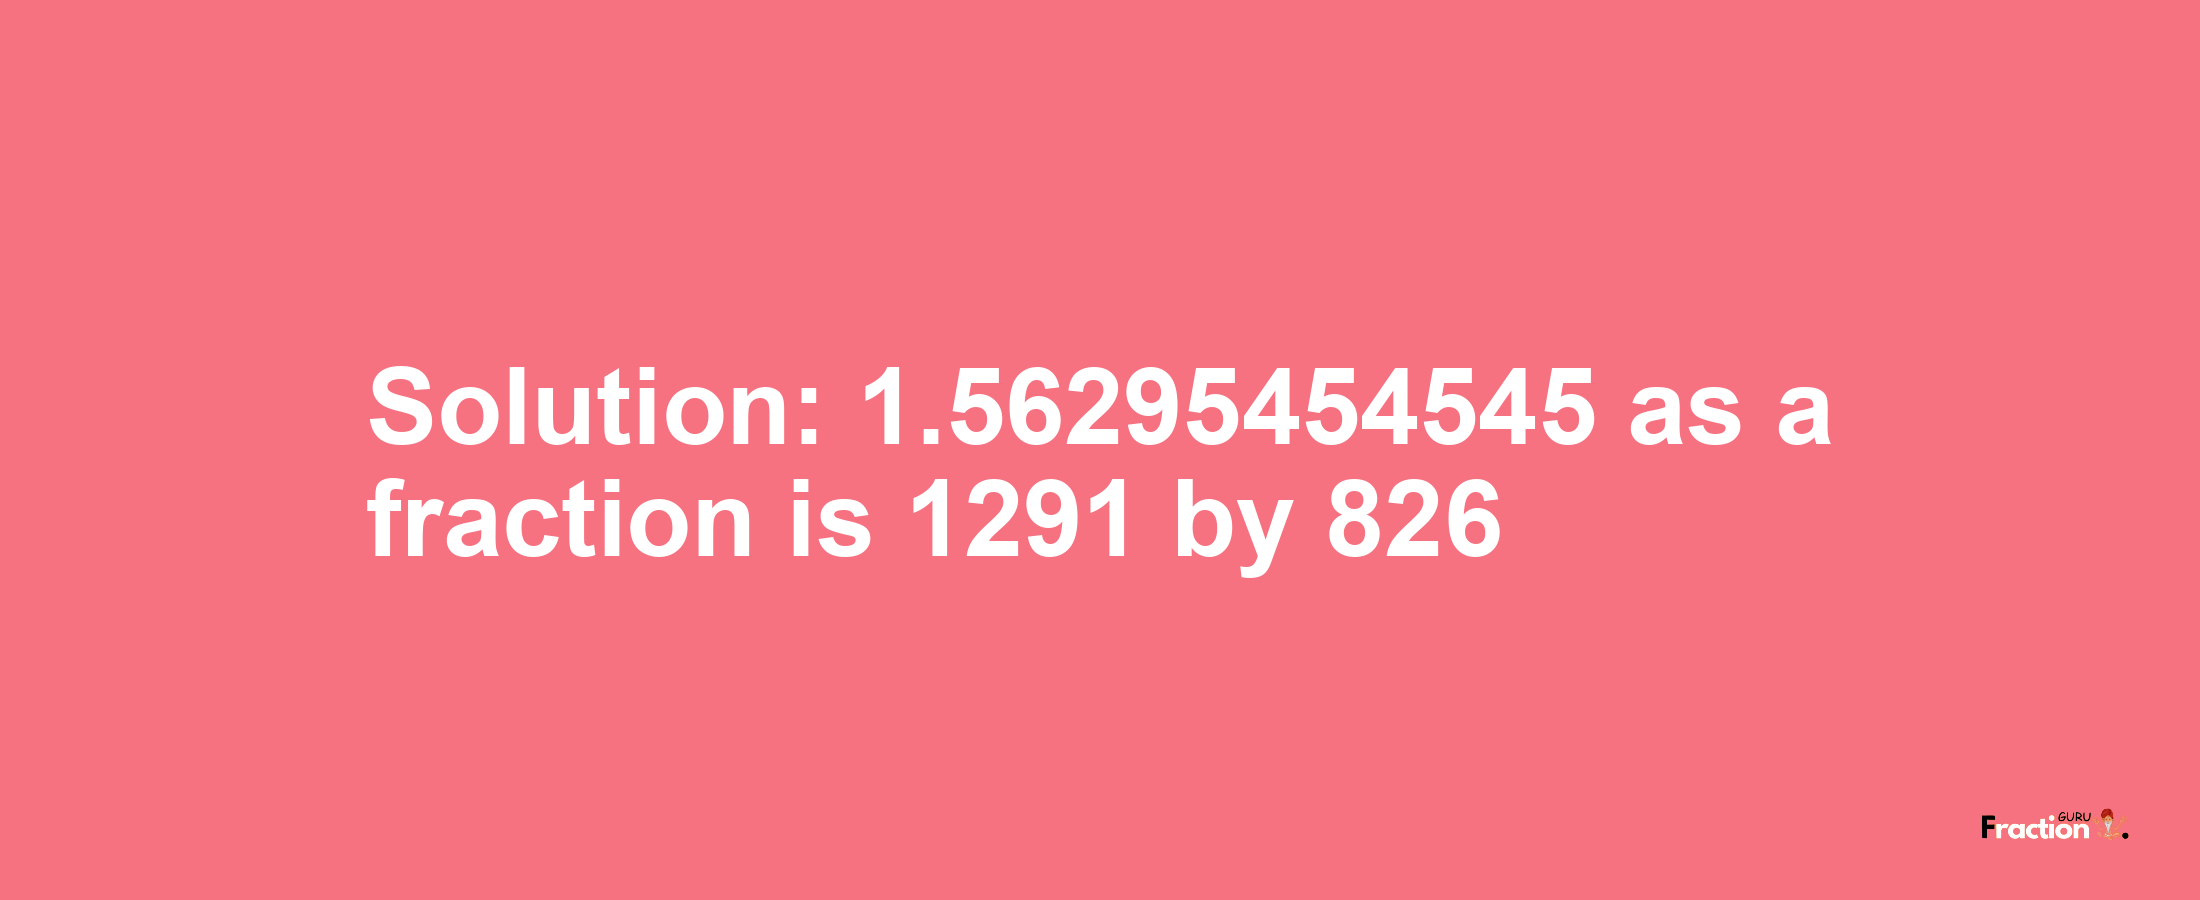 Solution:1.56295454545 as a fraction is 1291/826